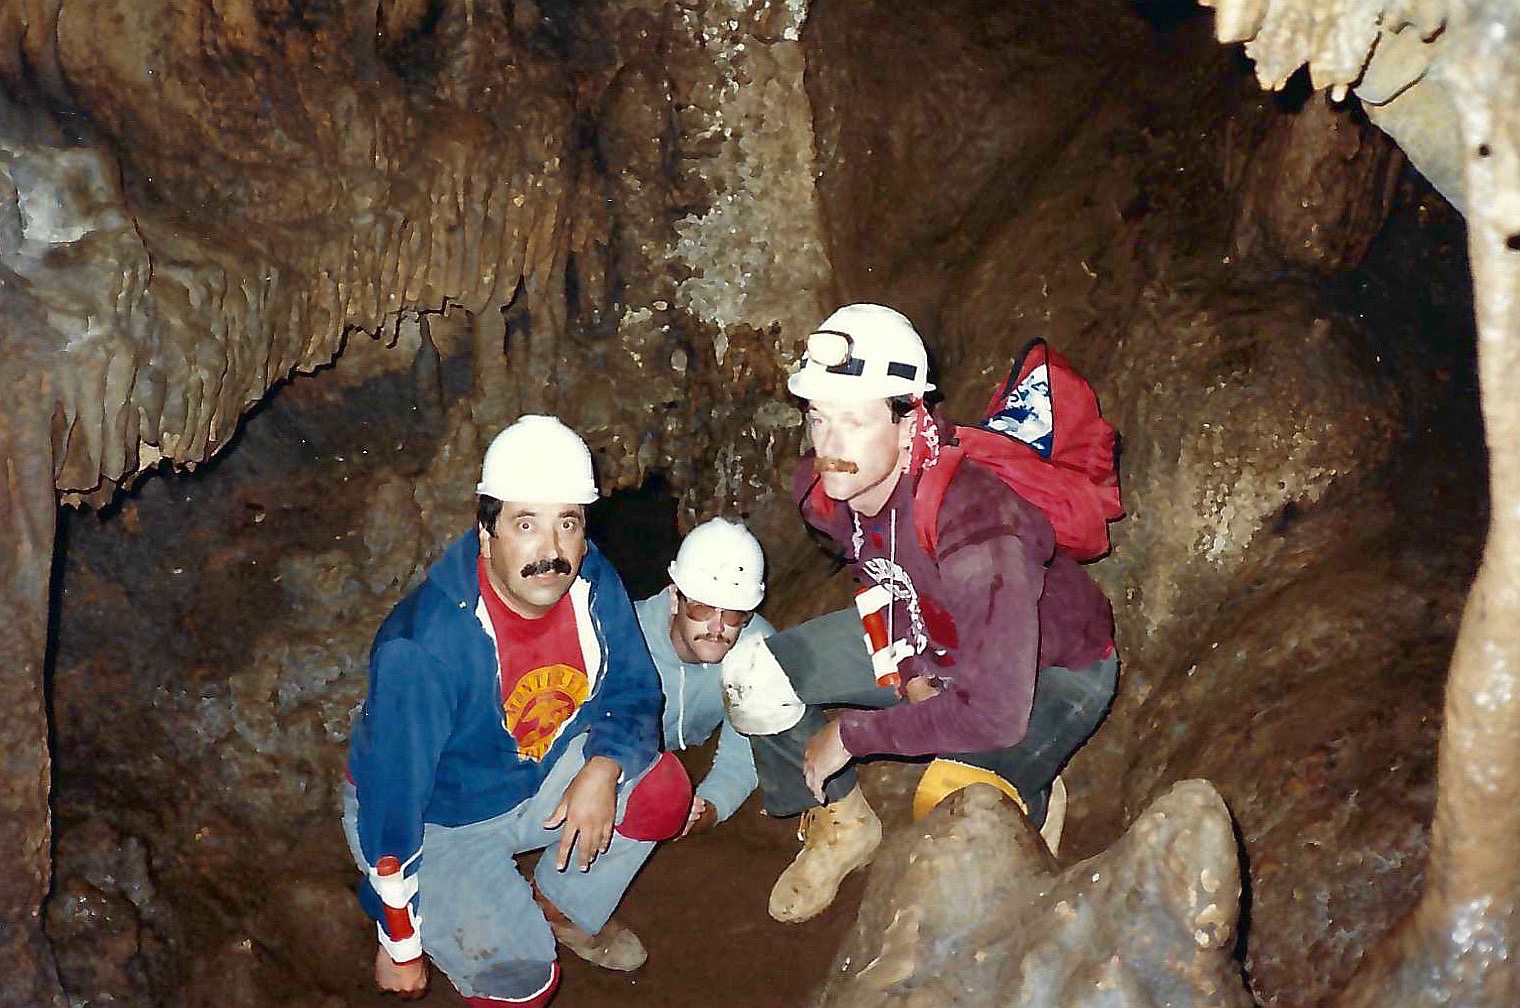 Jimmy's time spelunking with his buddies in caverns somewhere maybe in Virginia.